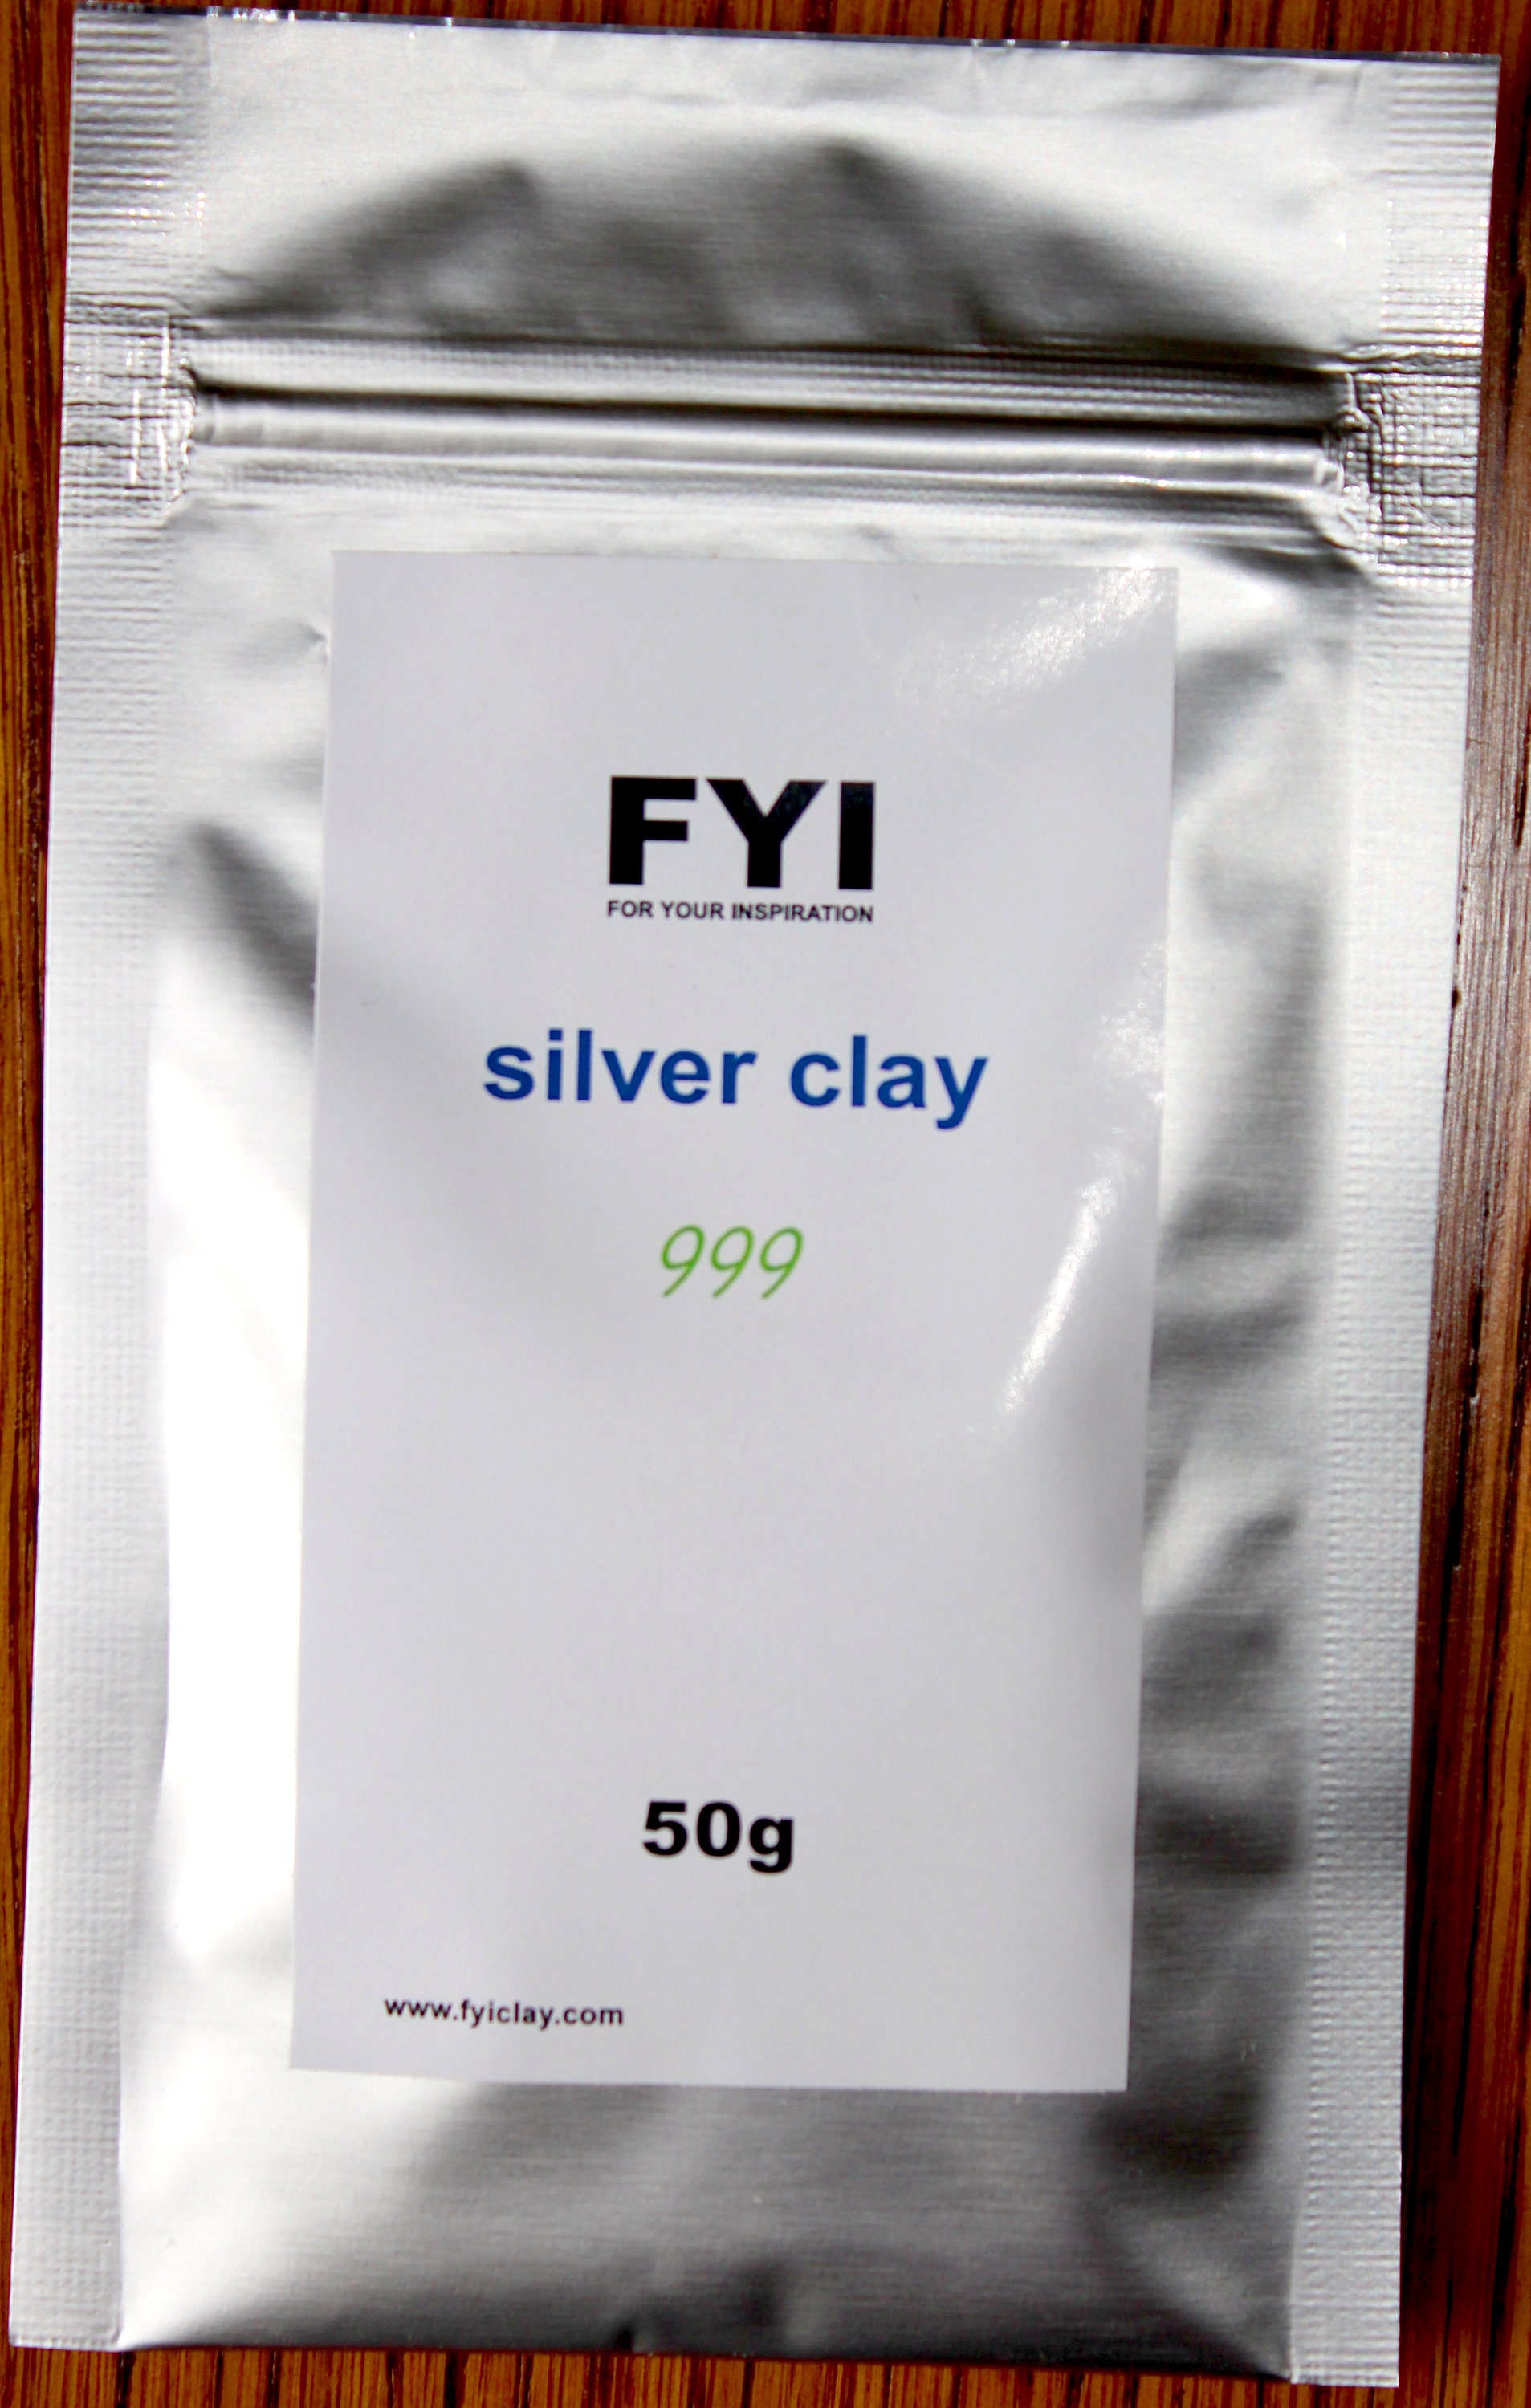 Review of FYI silver clay 999